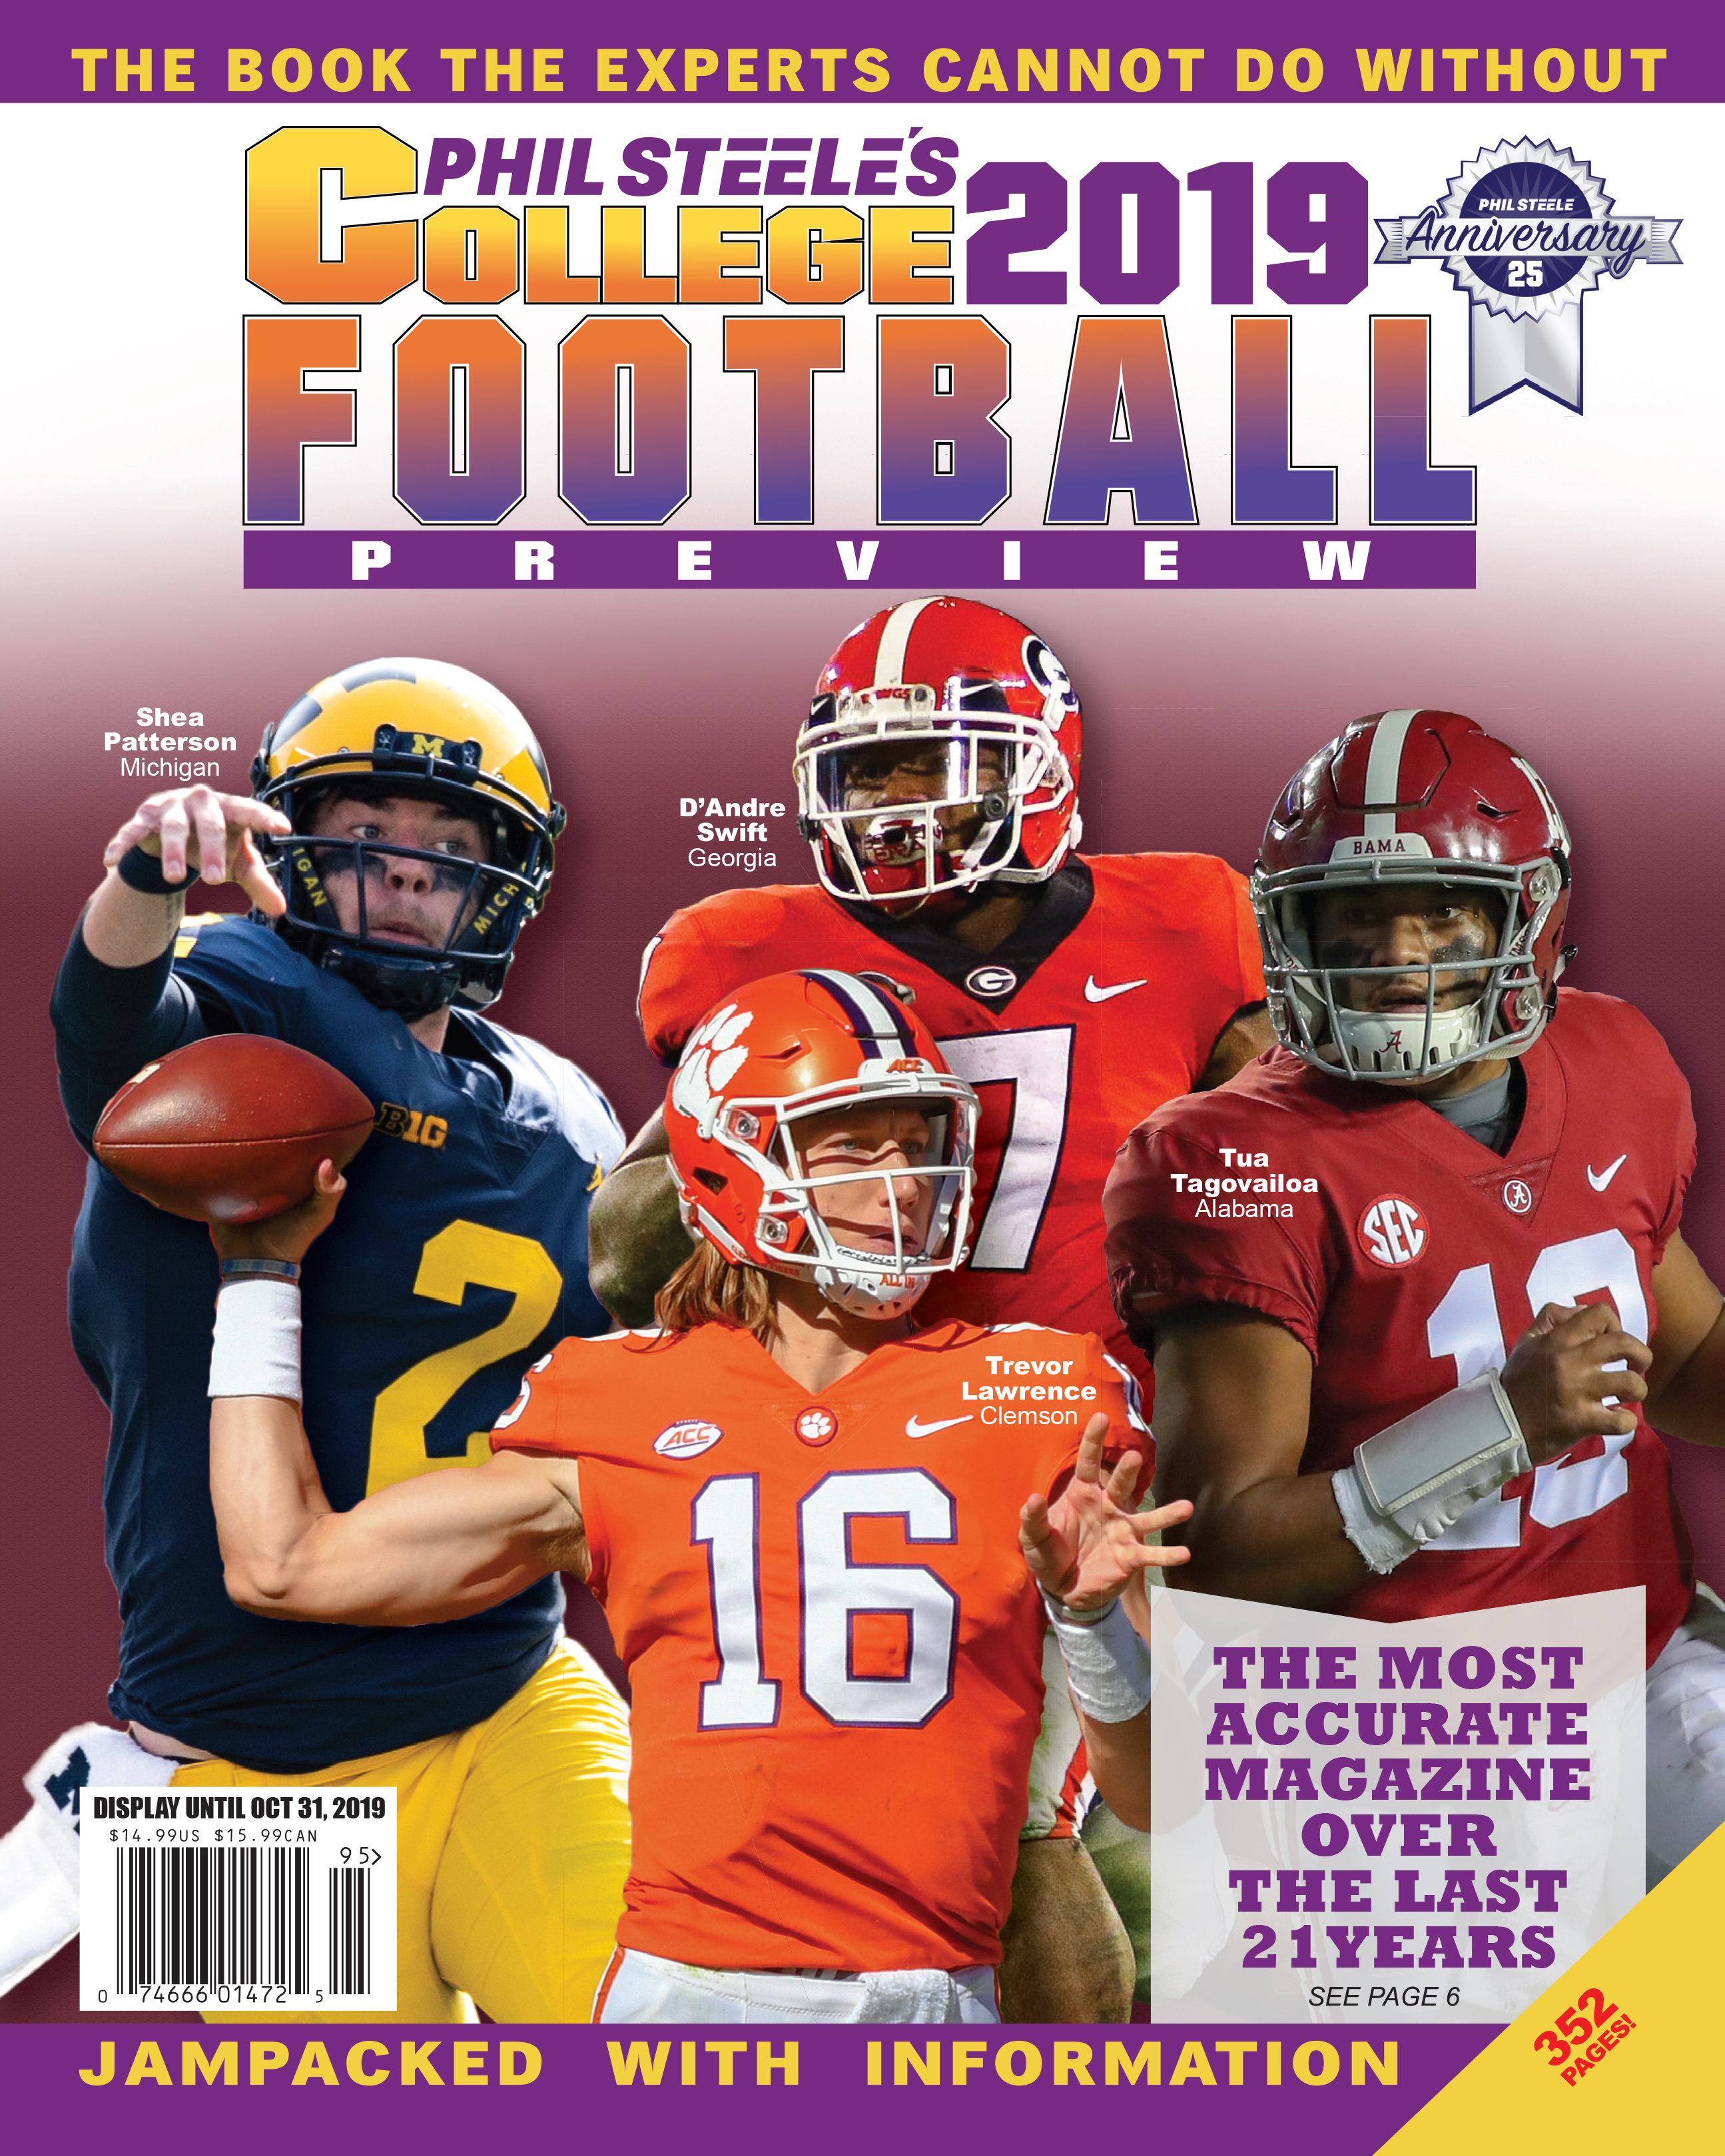 Available in Stores Now!! Phil Steele’s 2019 College Football Preview.